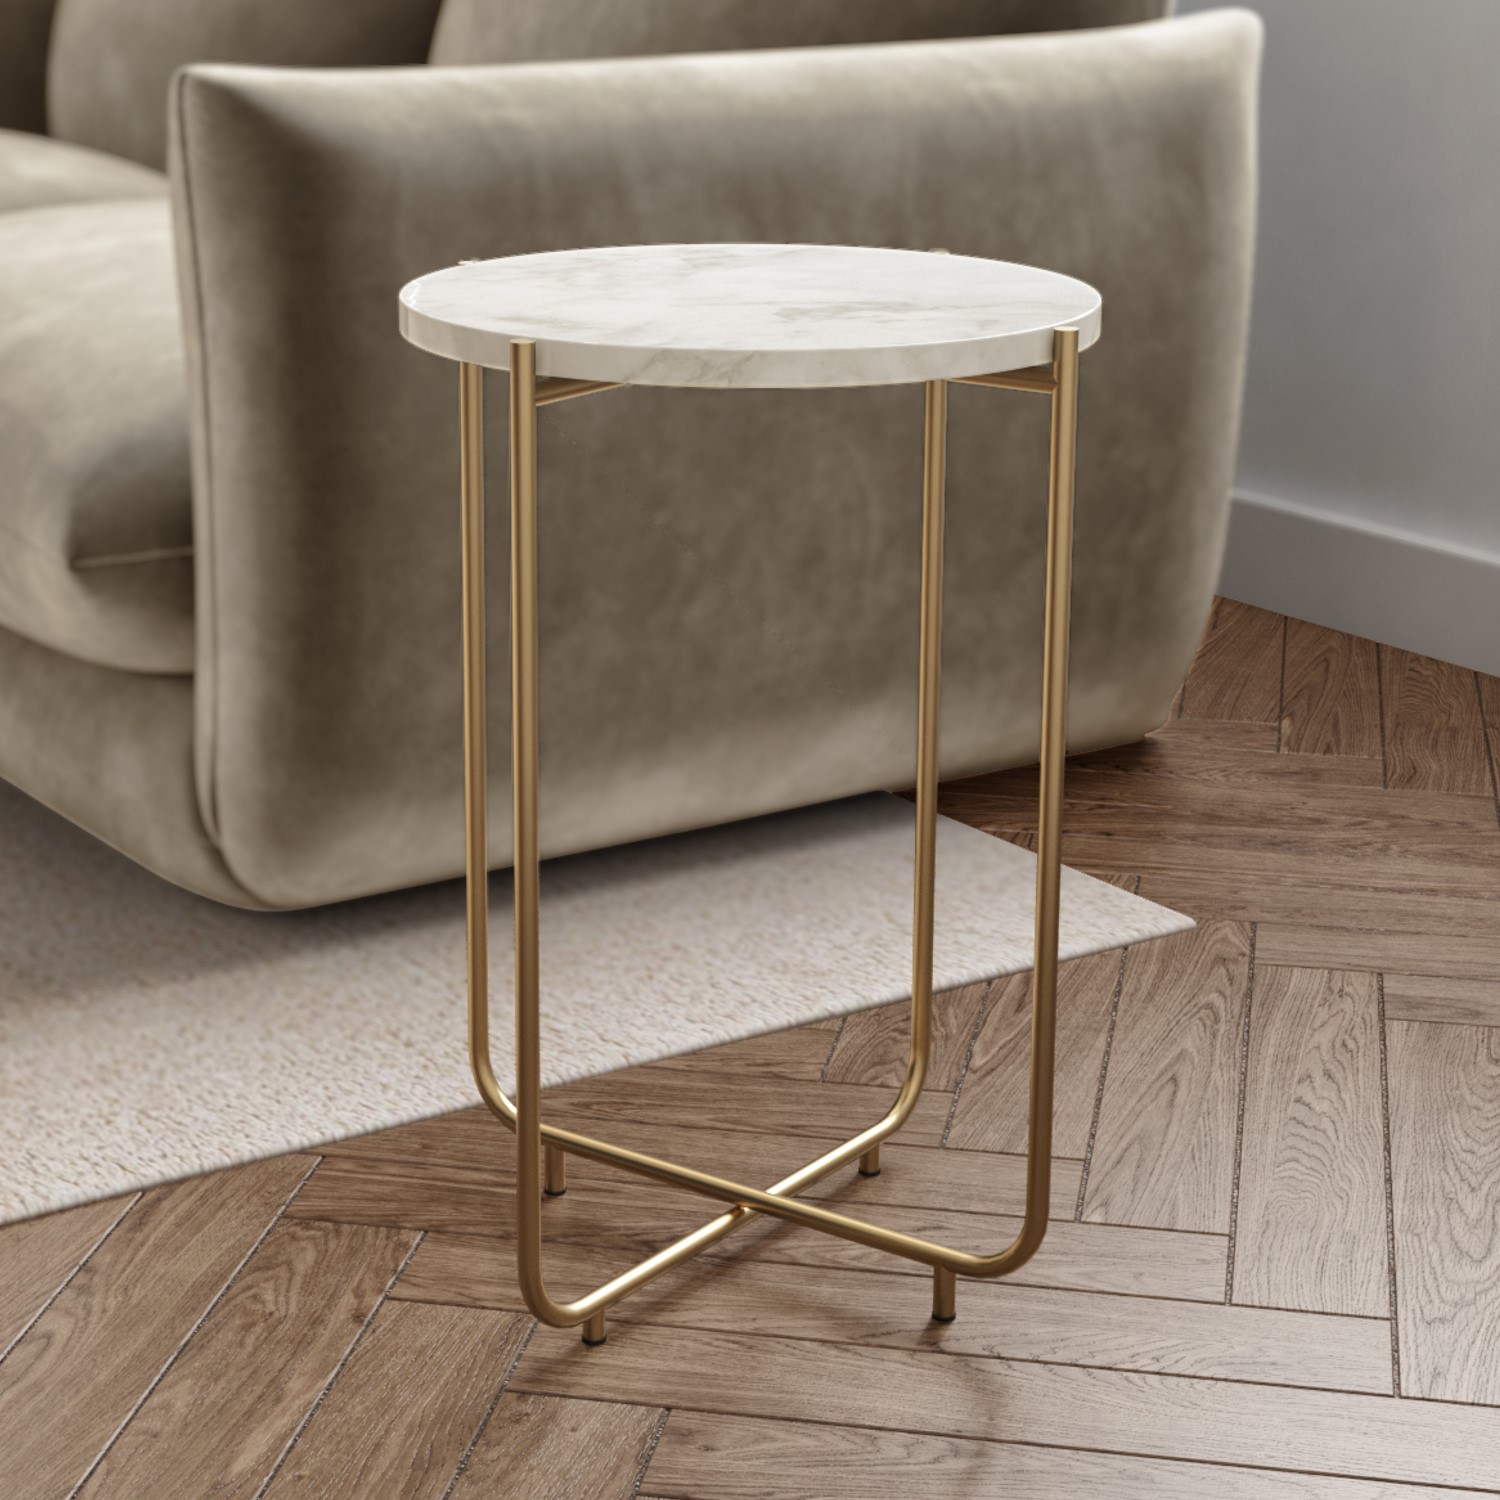 Marble Side Table In White With Gold, Modern Side Tables For Living Room Uk London